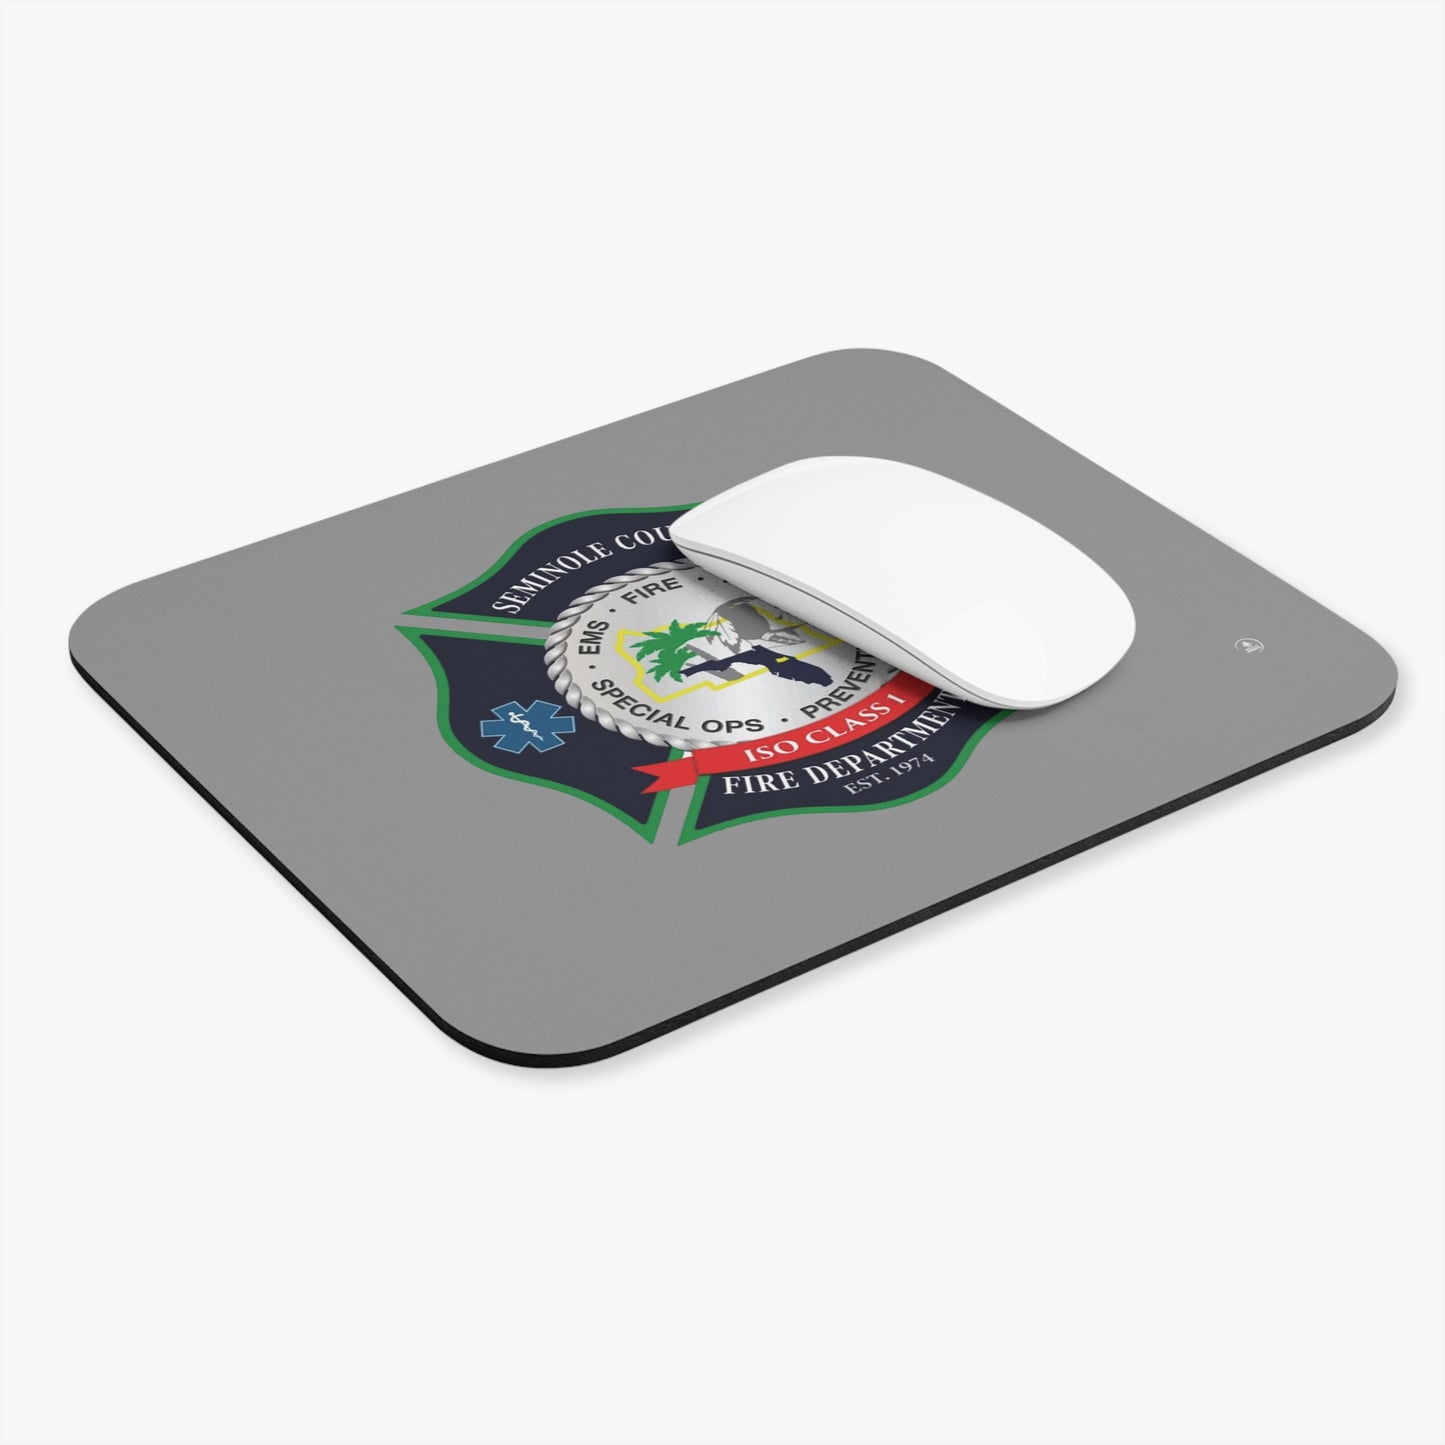 Seminole County Fire Department Logo Mouse Pad (Rectangle)